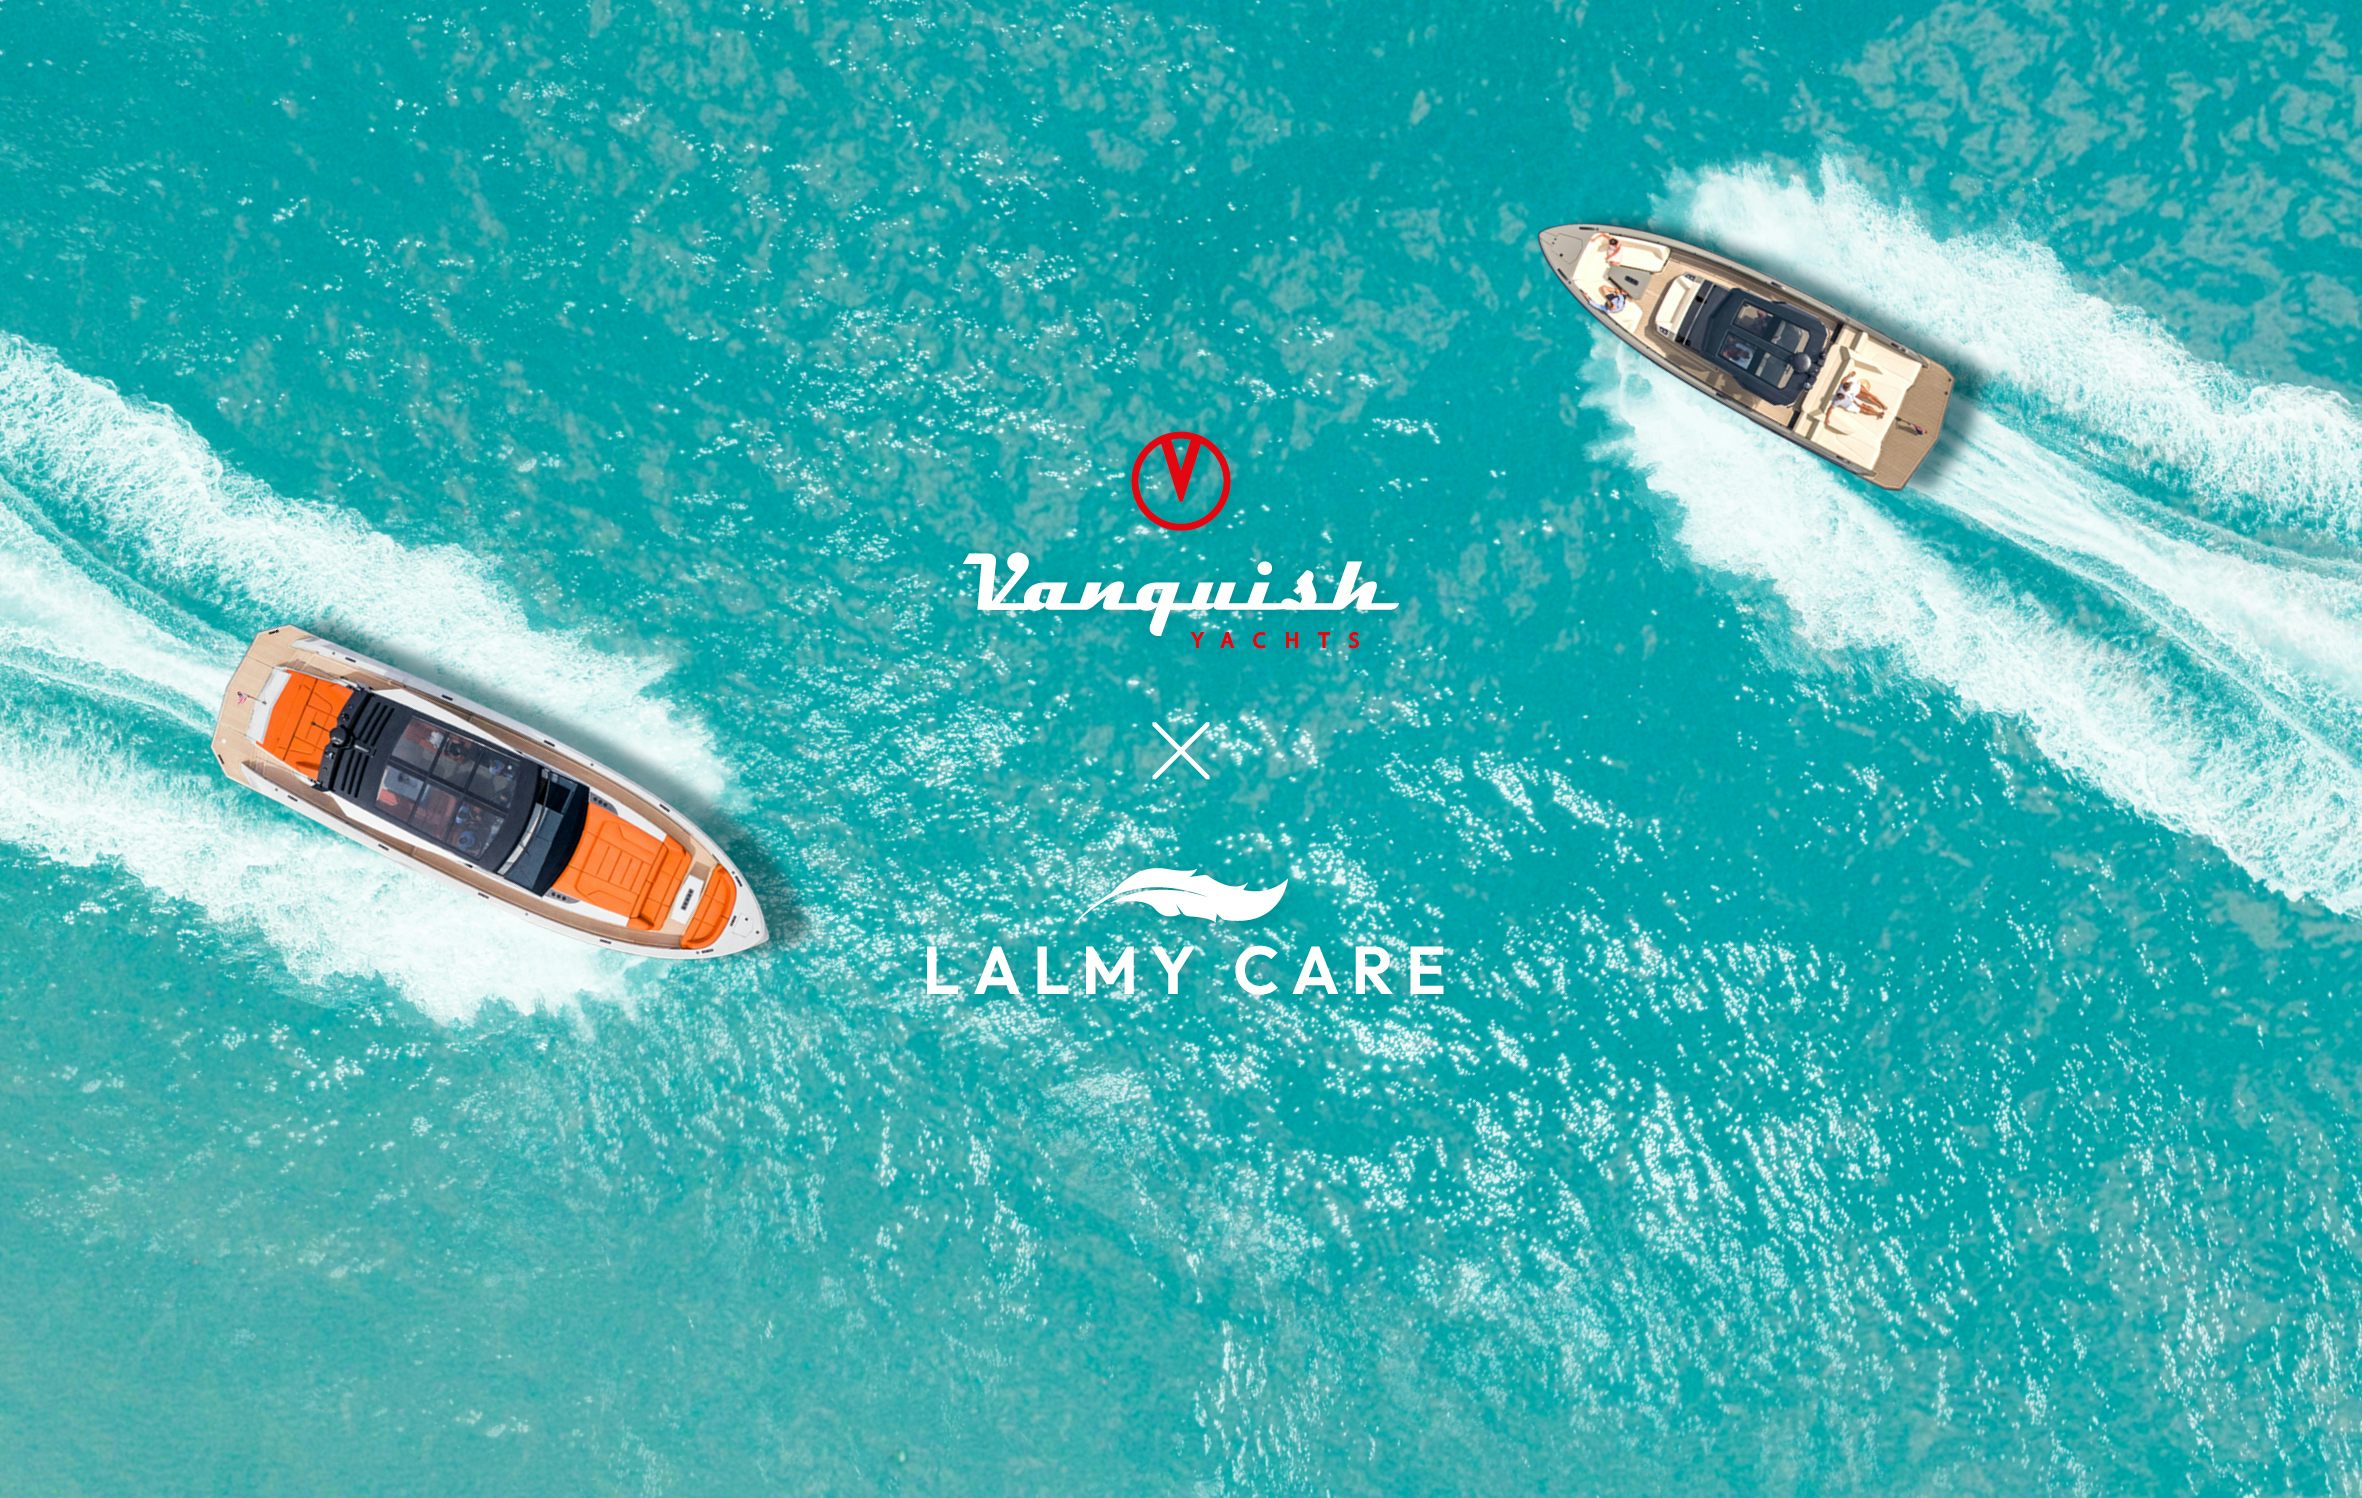 Vanquish Yachts signs partnership agreement with Lalmy Care.